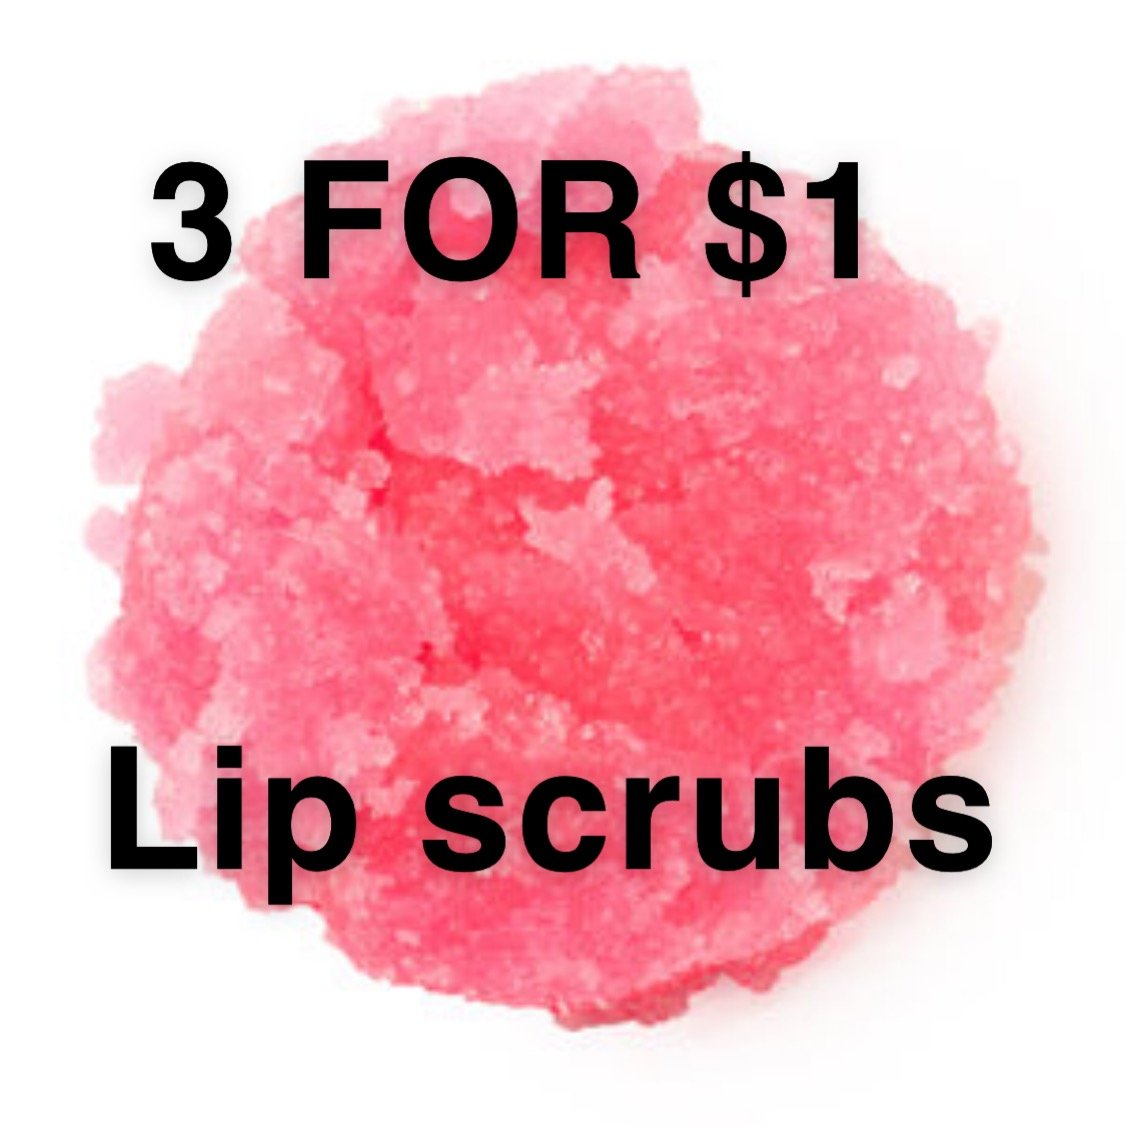 Image of (3 for $1) Lip Scrubs